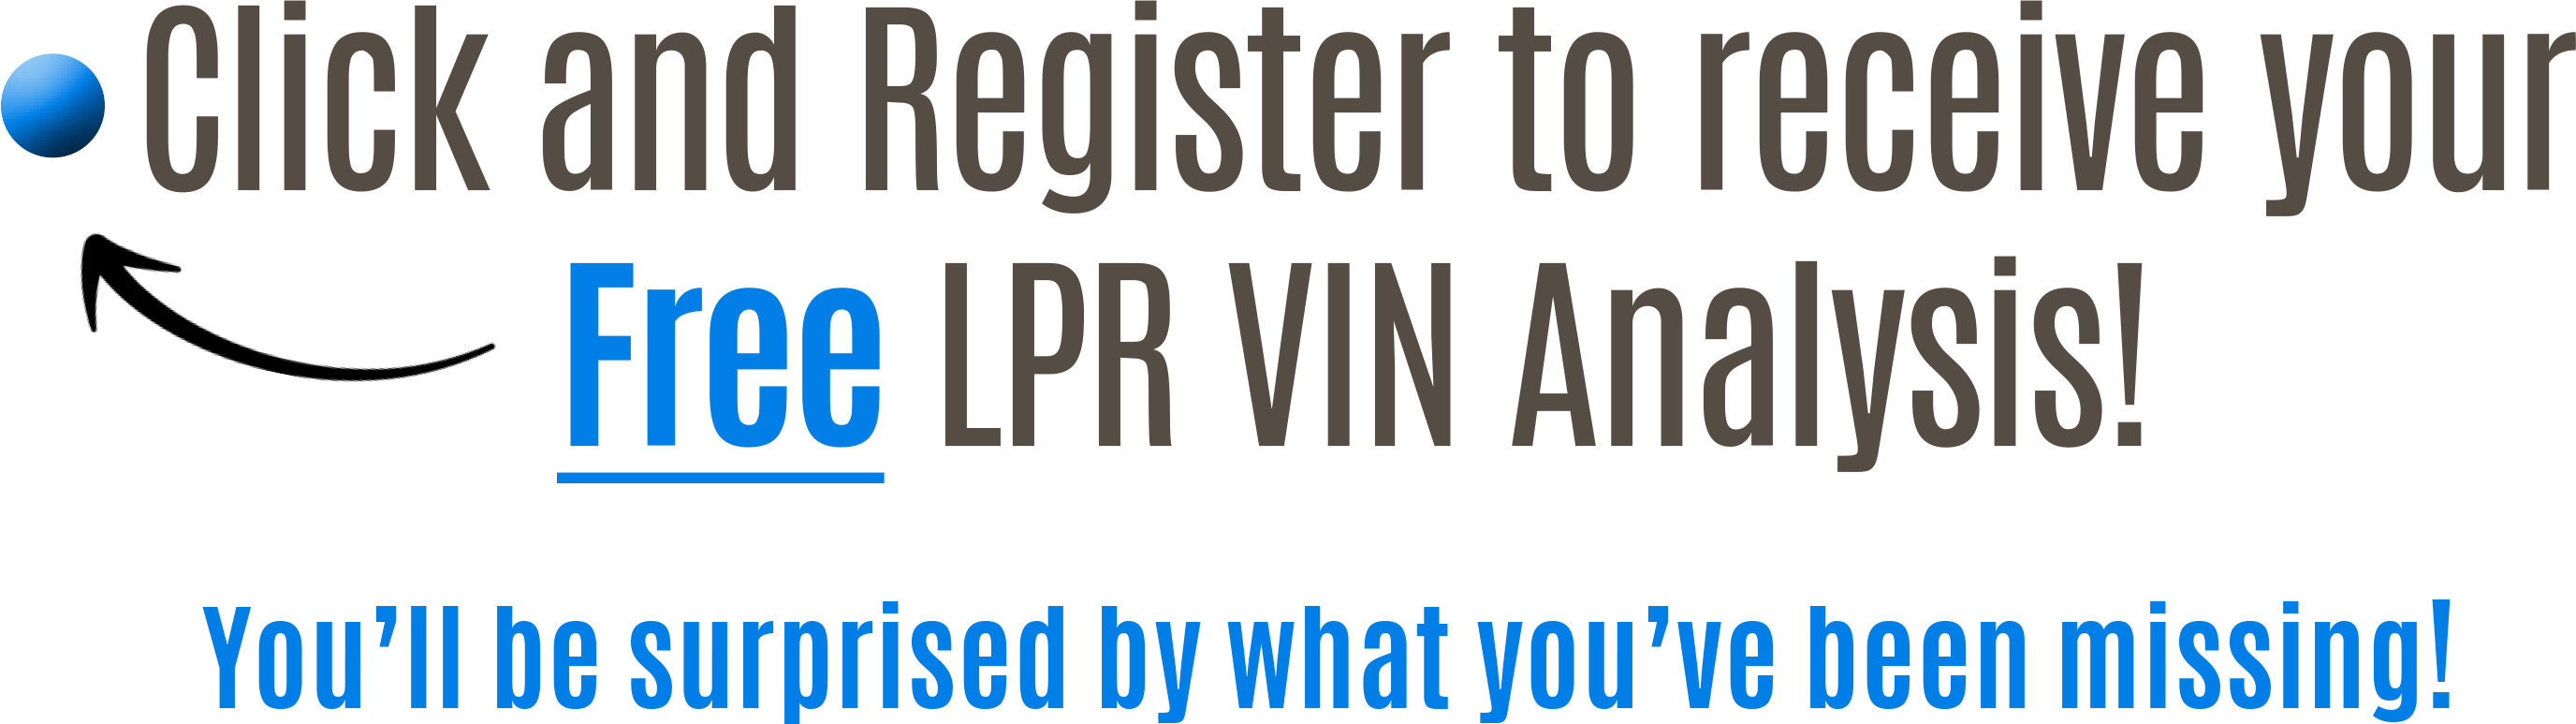 Click here and register to receive your FREE LPR VIN Analysis! 
You’ll be surprised by what you’ve been missing!